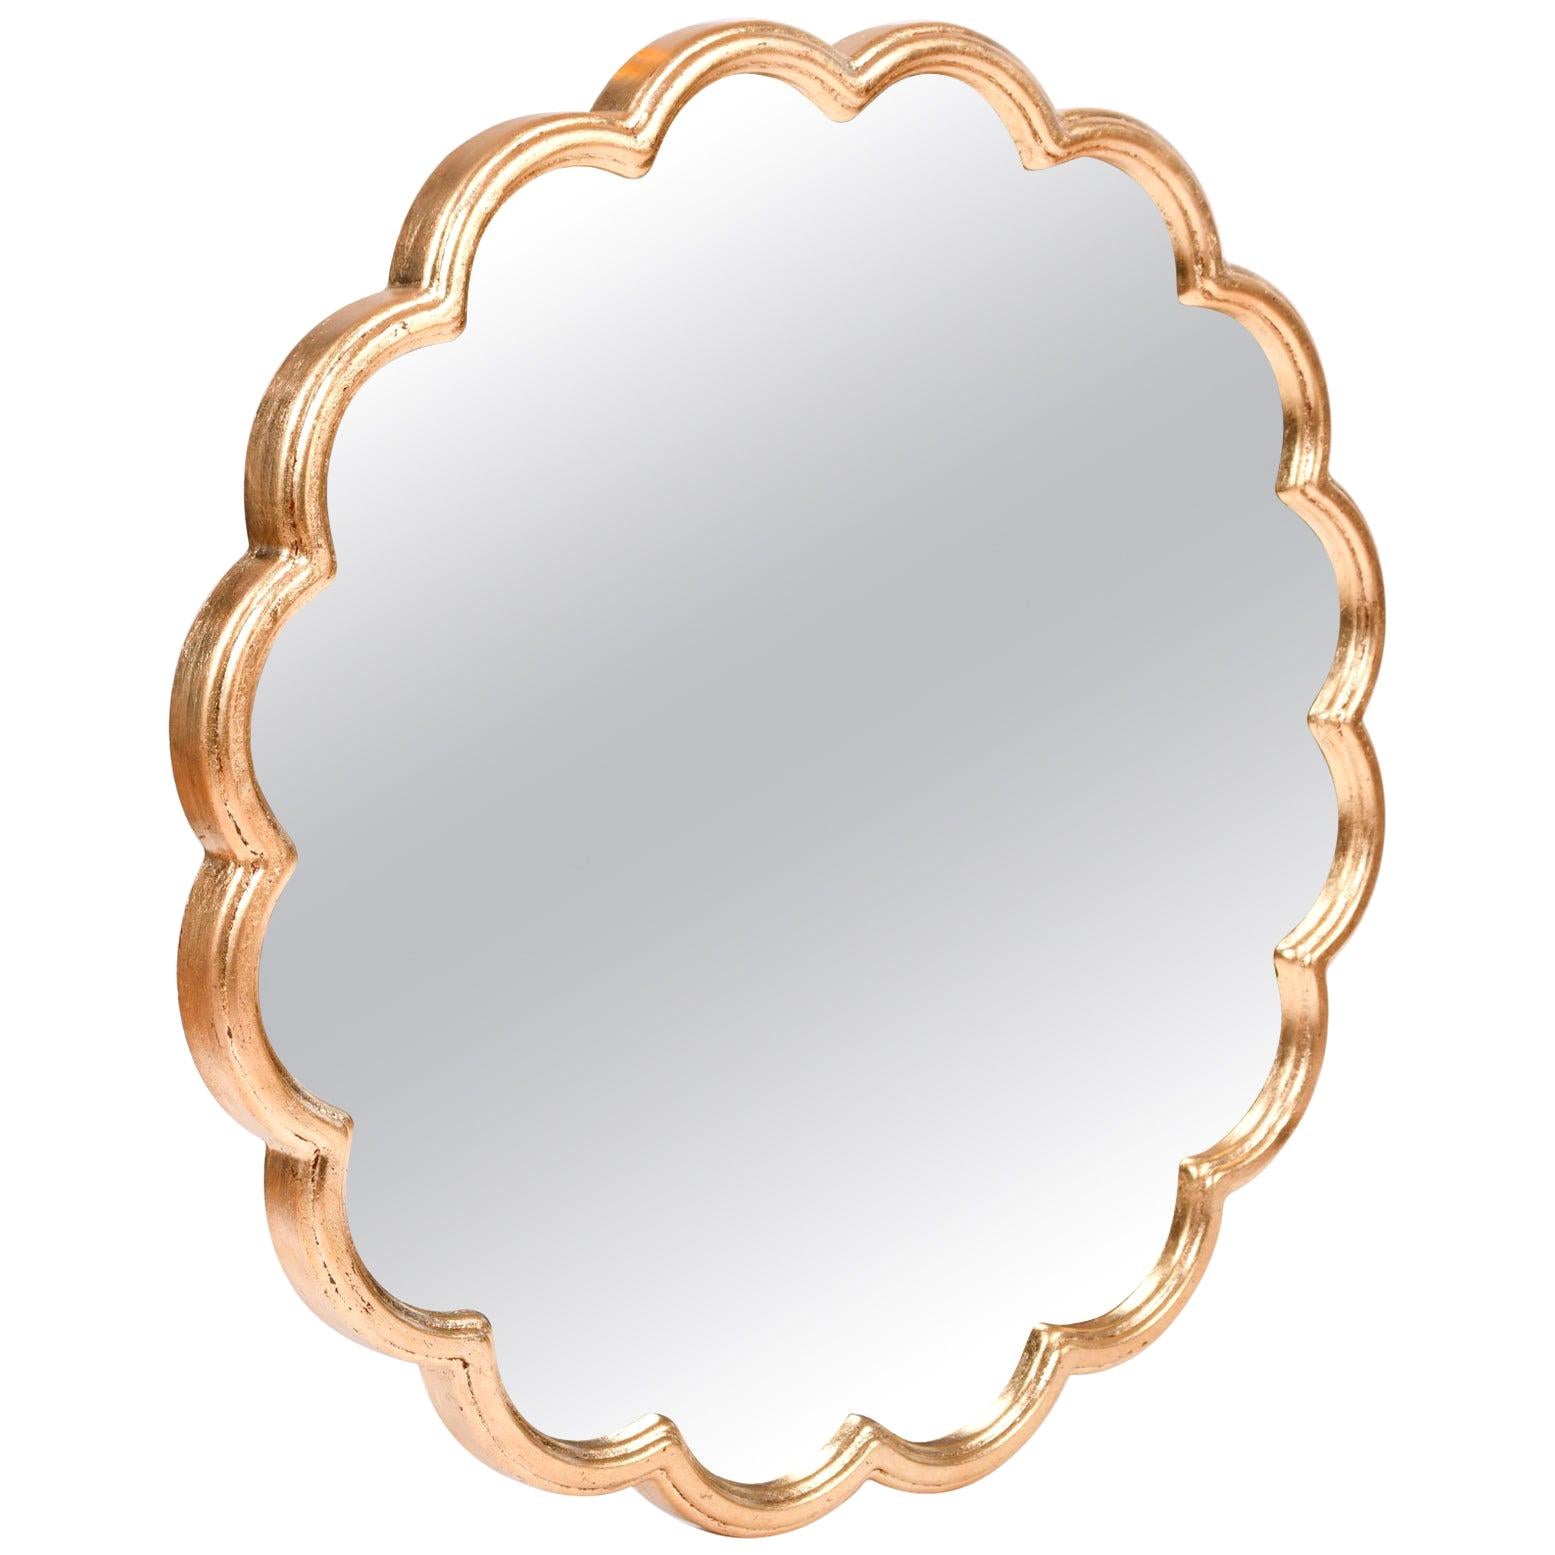 Inspired by the Riviera glamour of the late 1930s French modernist movement, our 'Monaco' mirror is a recent addition to VW Design. The double-moulded scalloped edge reflects another layer into the mirror giving a three layer effect. Hand finished